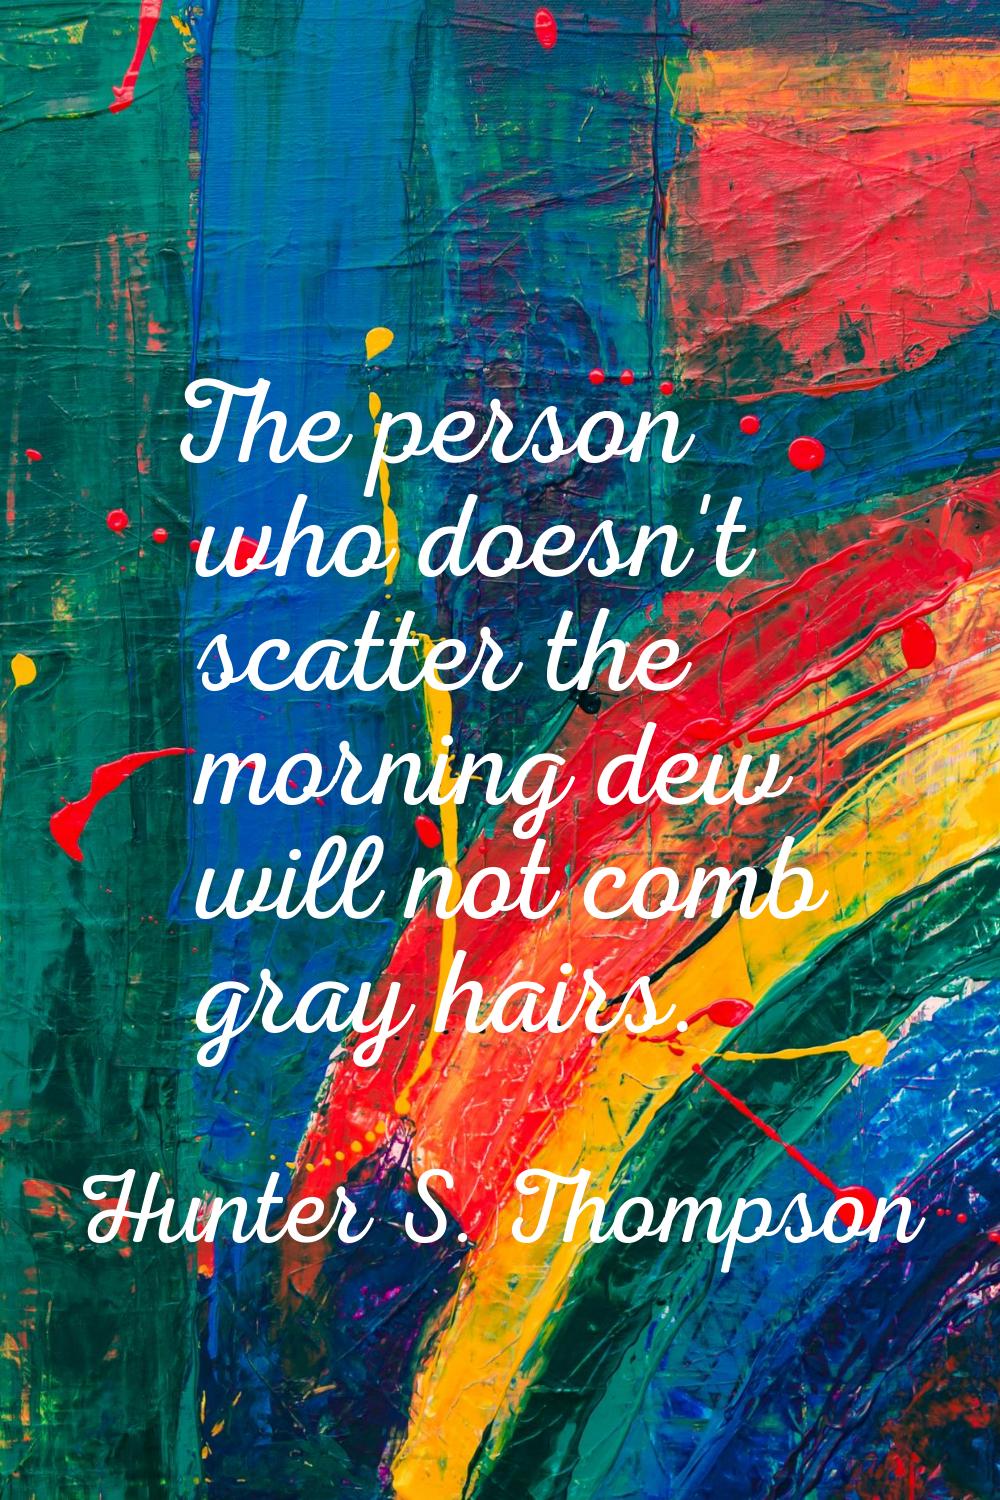 The person who doesn't scatter the morning dew will not comb gray hairs.